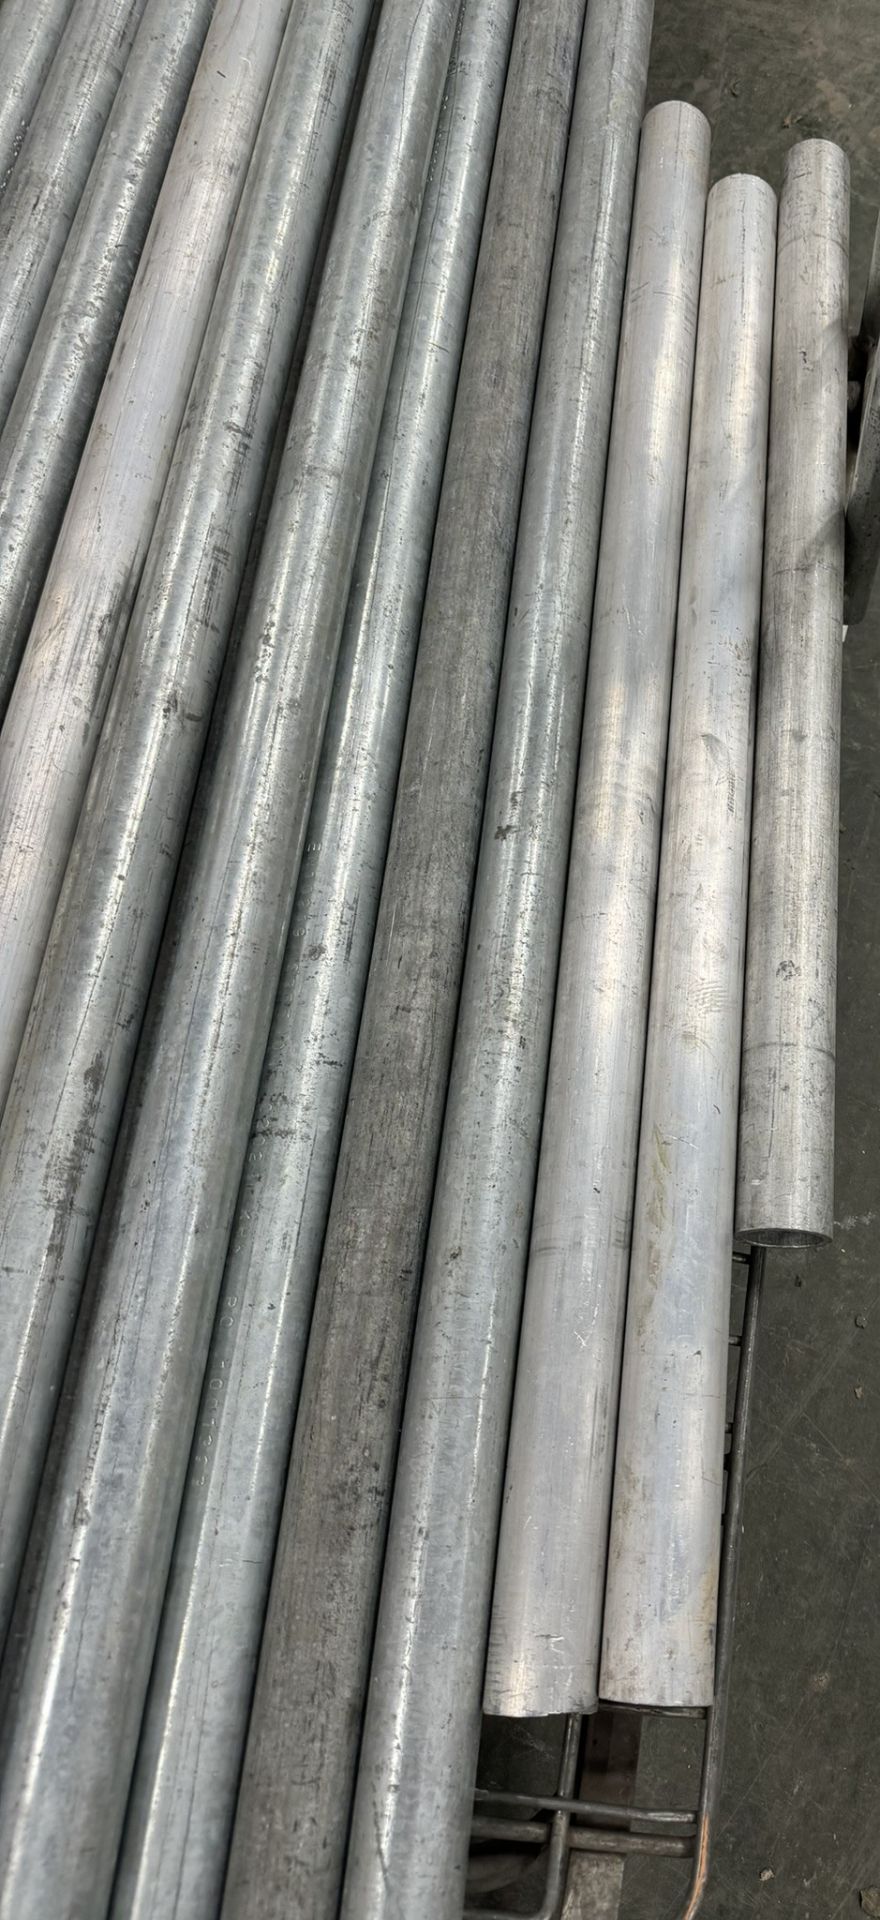 30 x Various Sized Scaffolding Bars / Tubes - As Pictured - Image 6 of 6